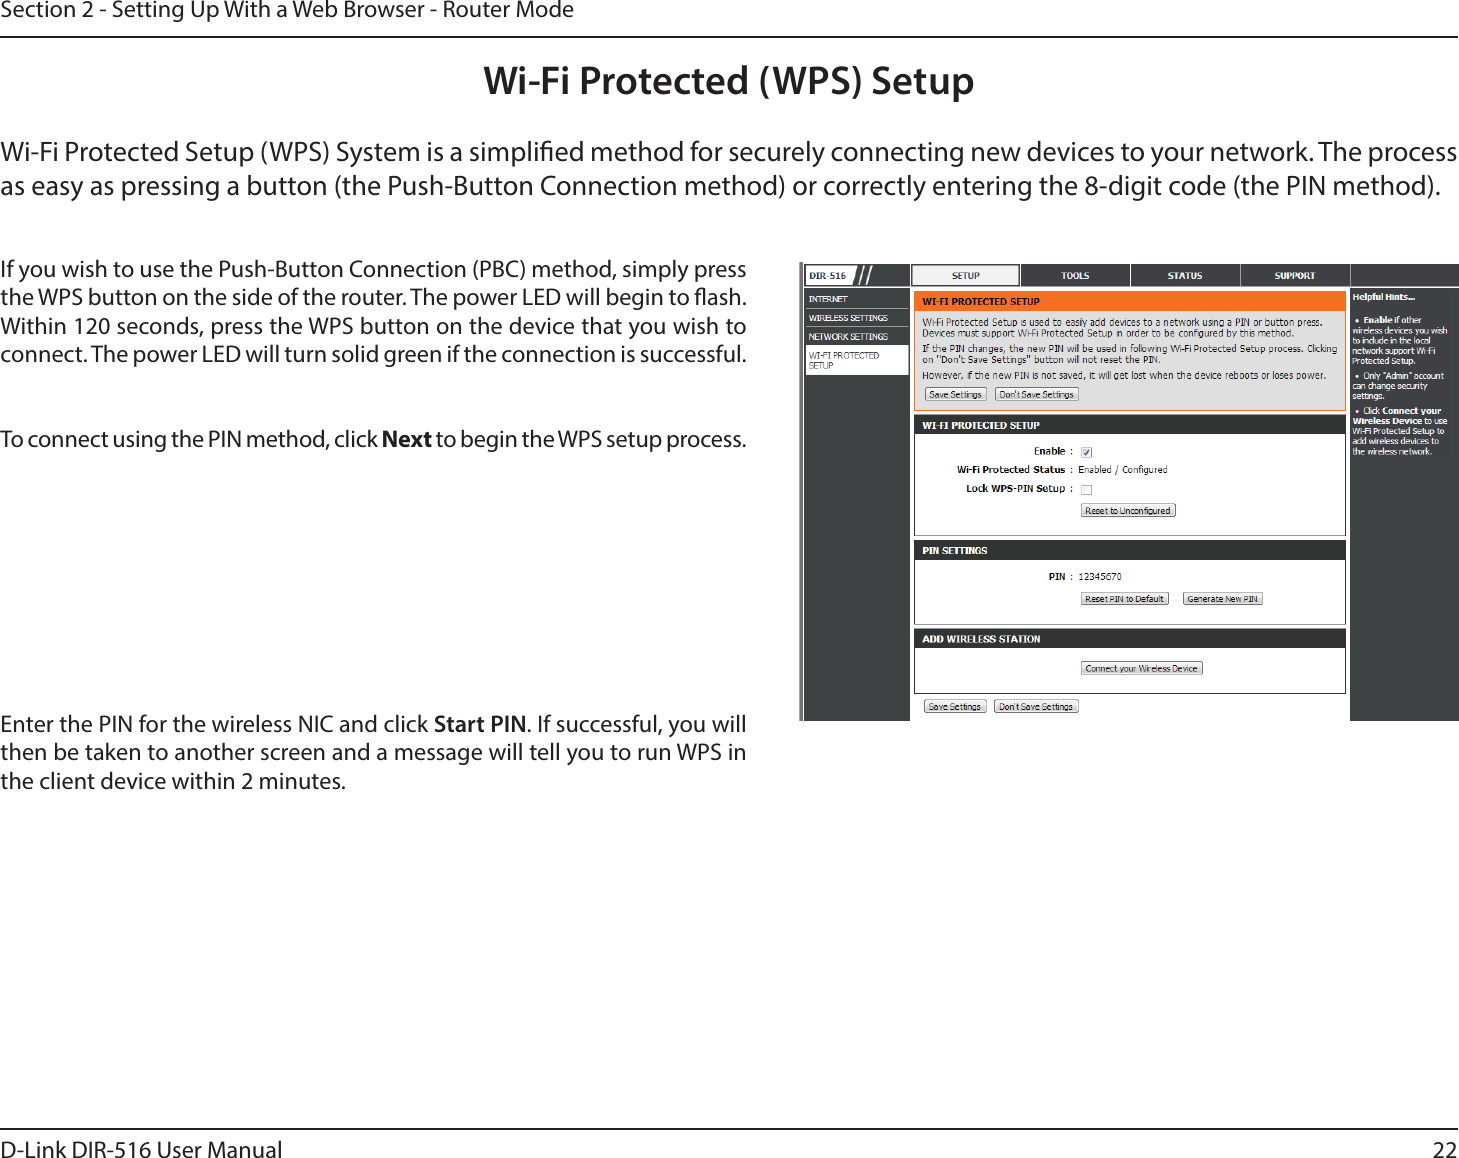 22D-Link DIR-516 User ManualSection 2 - Setting Up With a Web Browser - Router ModeWi-Fi Protected (WPS) SetupWi-Fi Protected Setup (WPS) System is a simplied method for securely connecting new devices to your network. The process as easy as pressing a button (the Push-Button Connection method) or correctly entering the 8-digit code (the PIN method).If you wish to use the Push-Button Connection (PBC) method, simply press the WPS button on the side of the router. The power LED will begin to ash. Within 120 seconds, press the WPS button on the device that you wish to connect. The power LED will turn solid green if the connection is successful. To connect using the PIN method, click Next to begin the WPS setup process. Enter the PIN for the wireless NIC and click Start PIN. If successful, you will then be taken to another screen and a message will tell you to run WPS in the client device within 2 minutes.